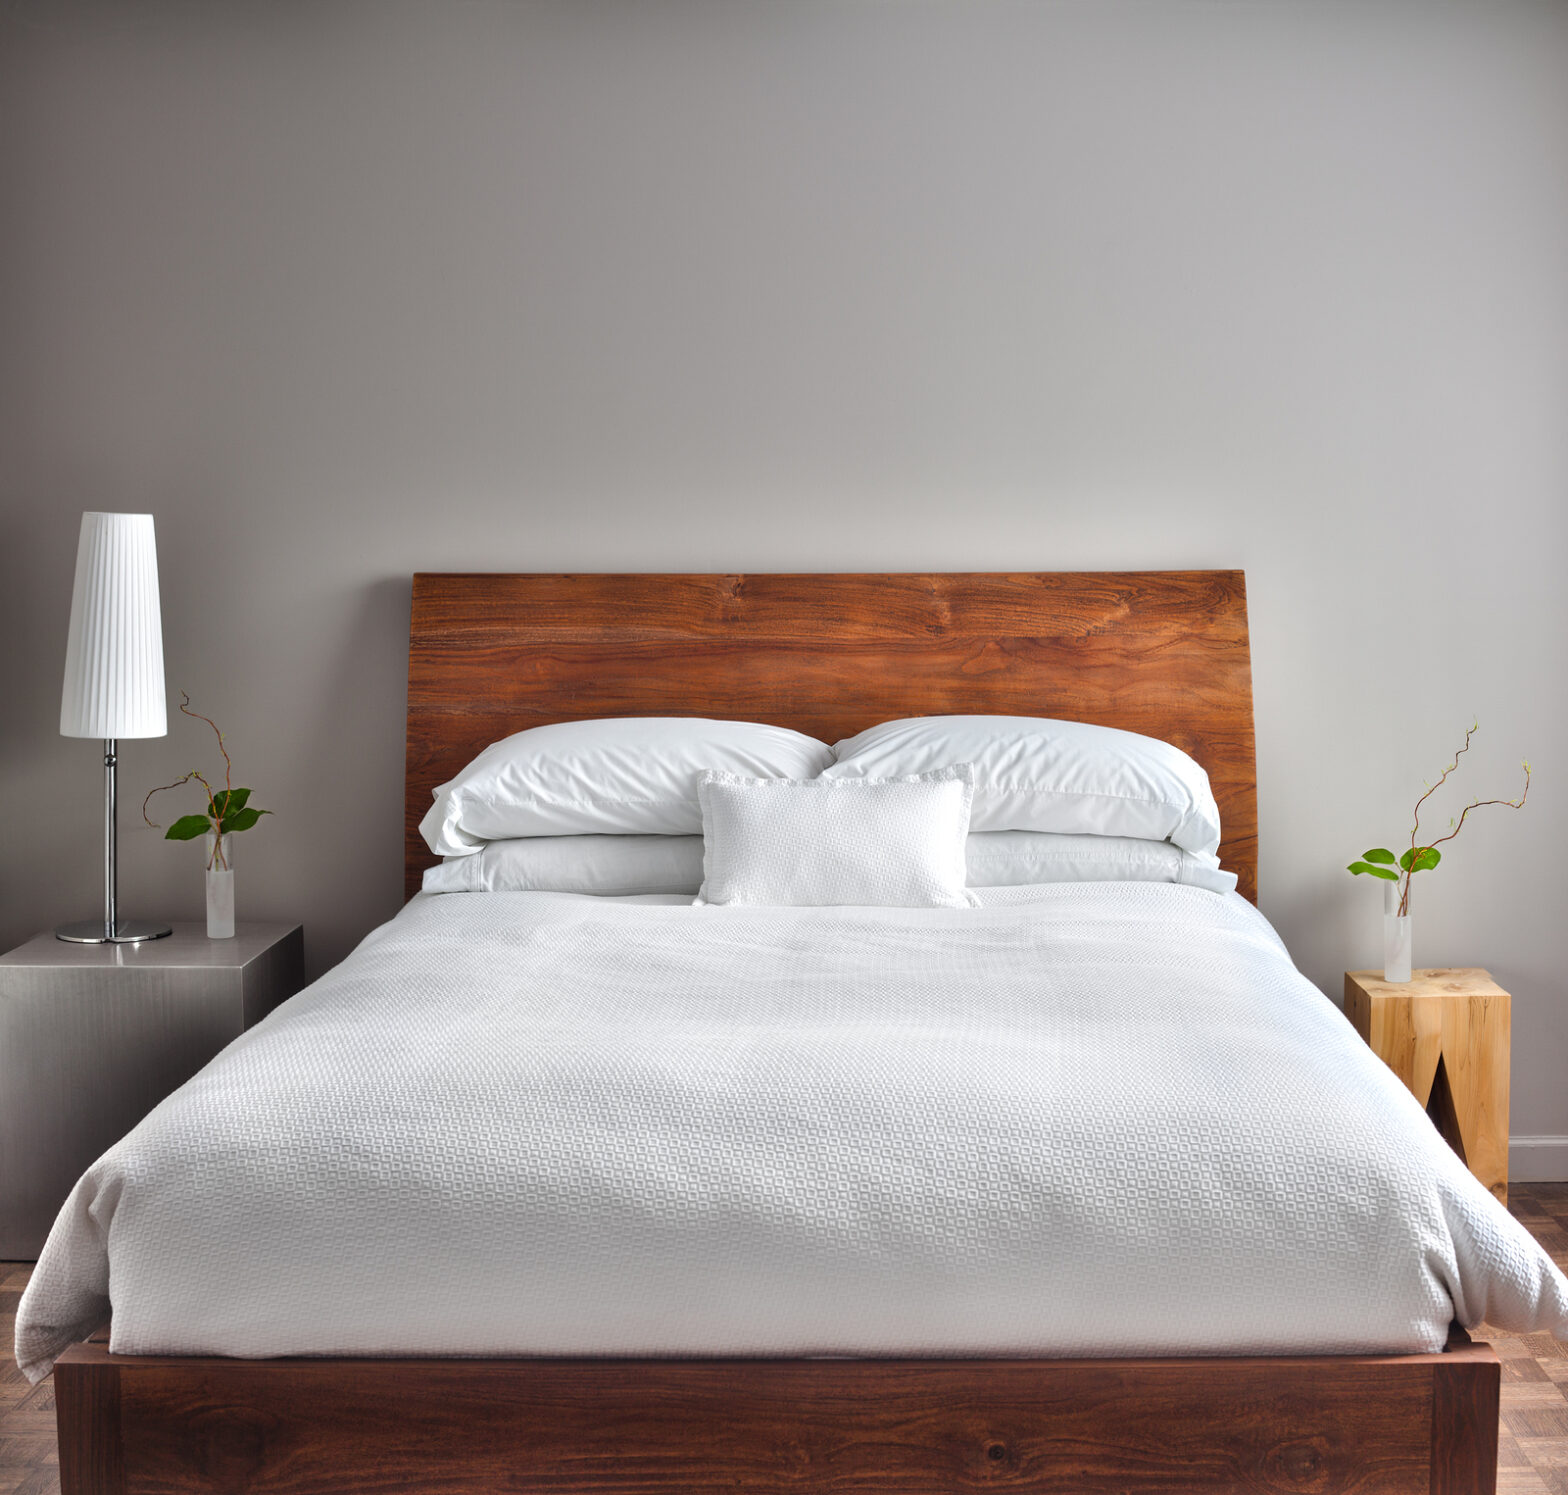 5 easy ways to care for your bedroom